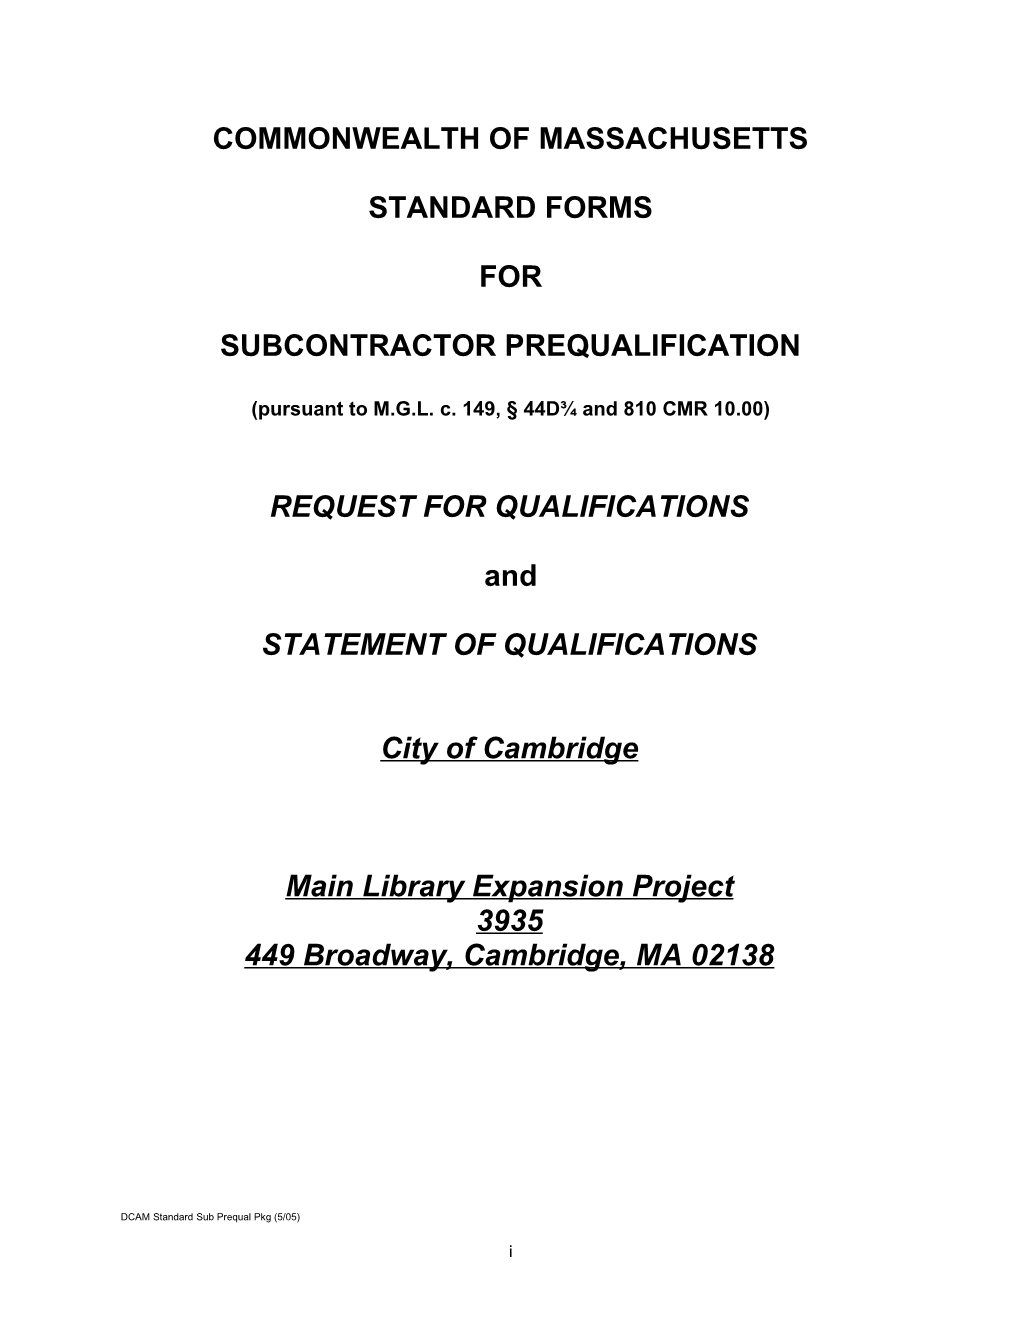 Request for Qualifications s1